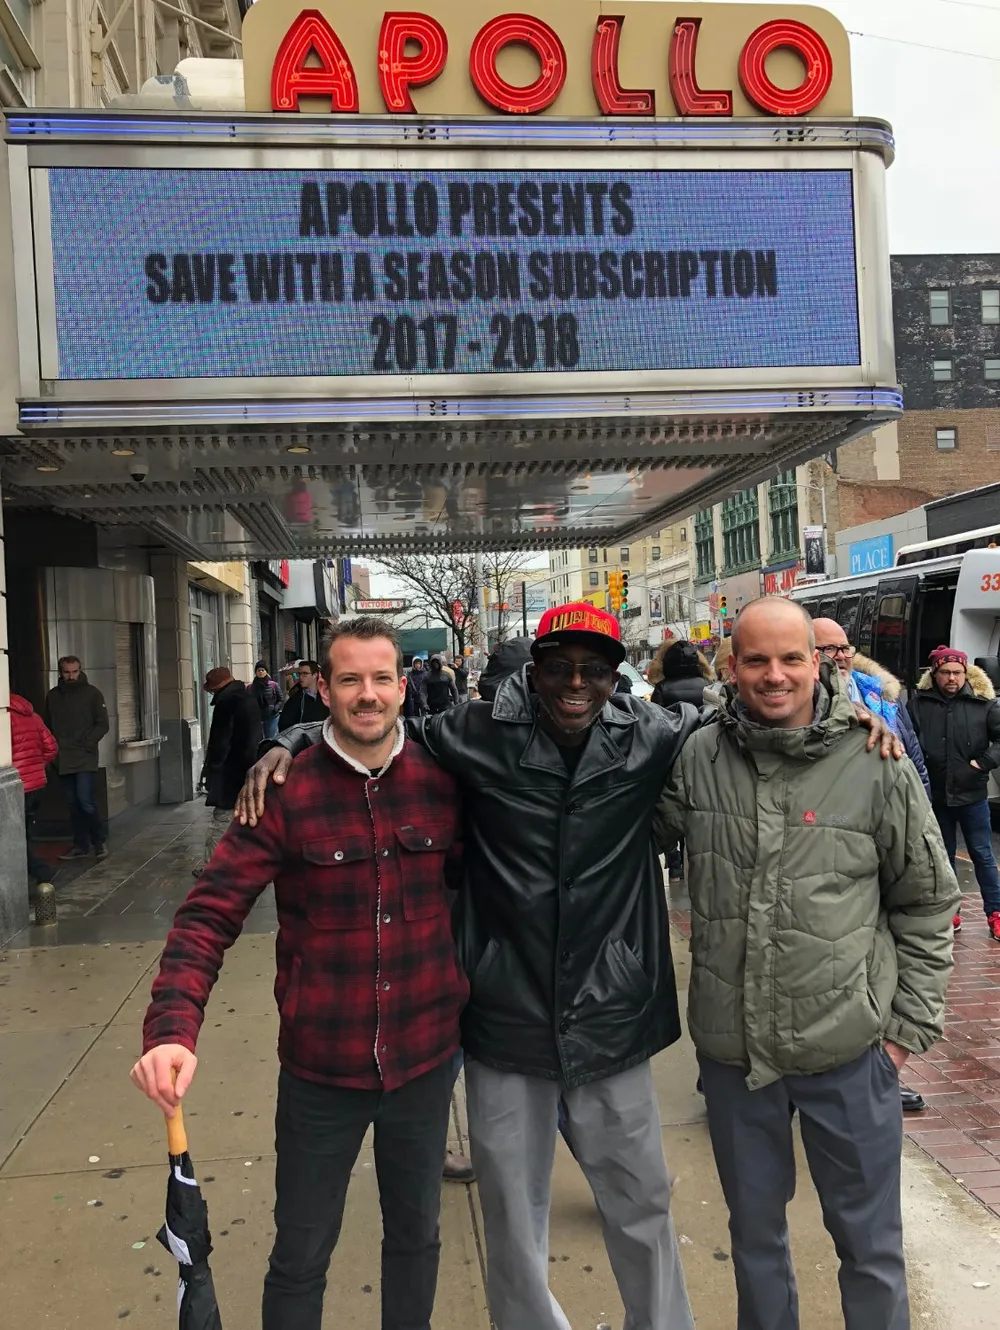 Three smiling men are posing together in front of the iconic Apollo Theater marquee which advertises a season subscription for 2017-2018